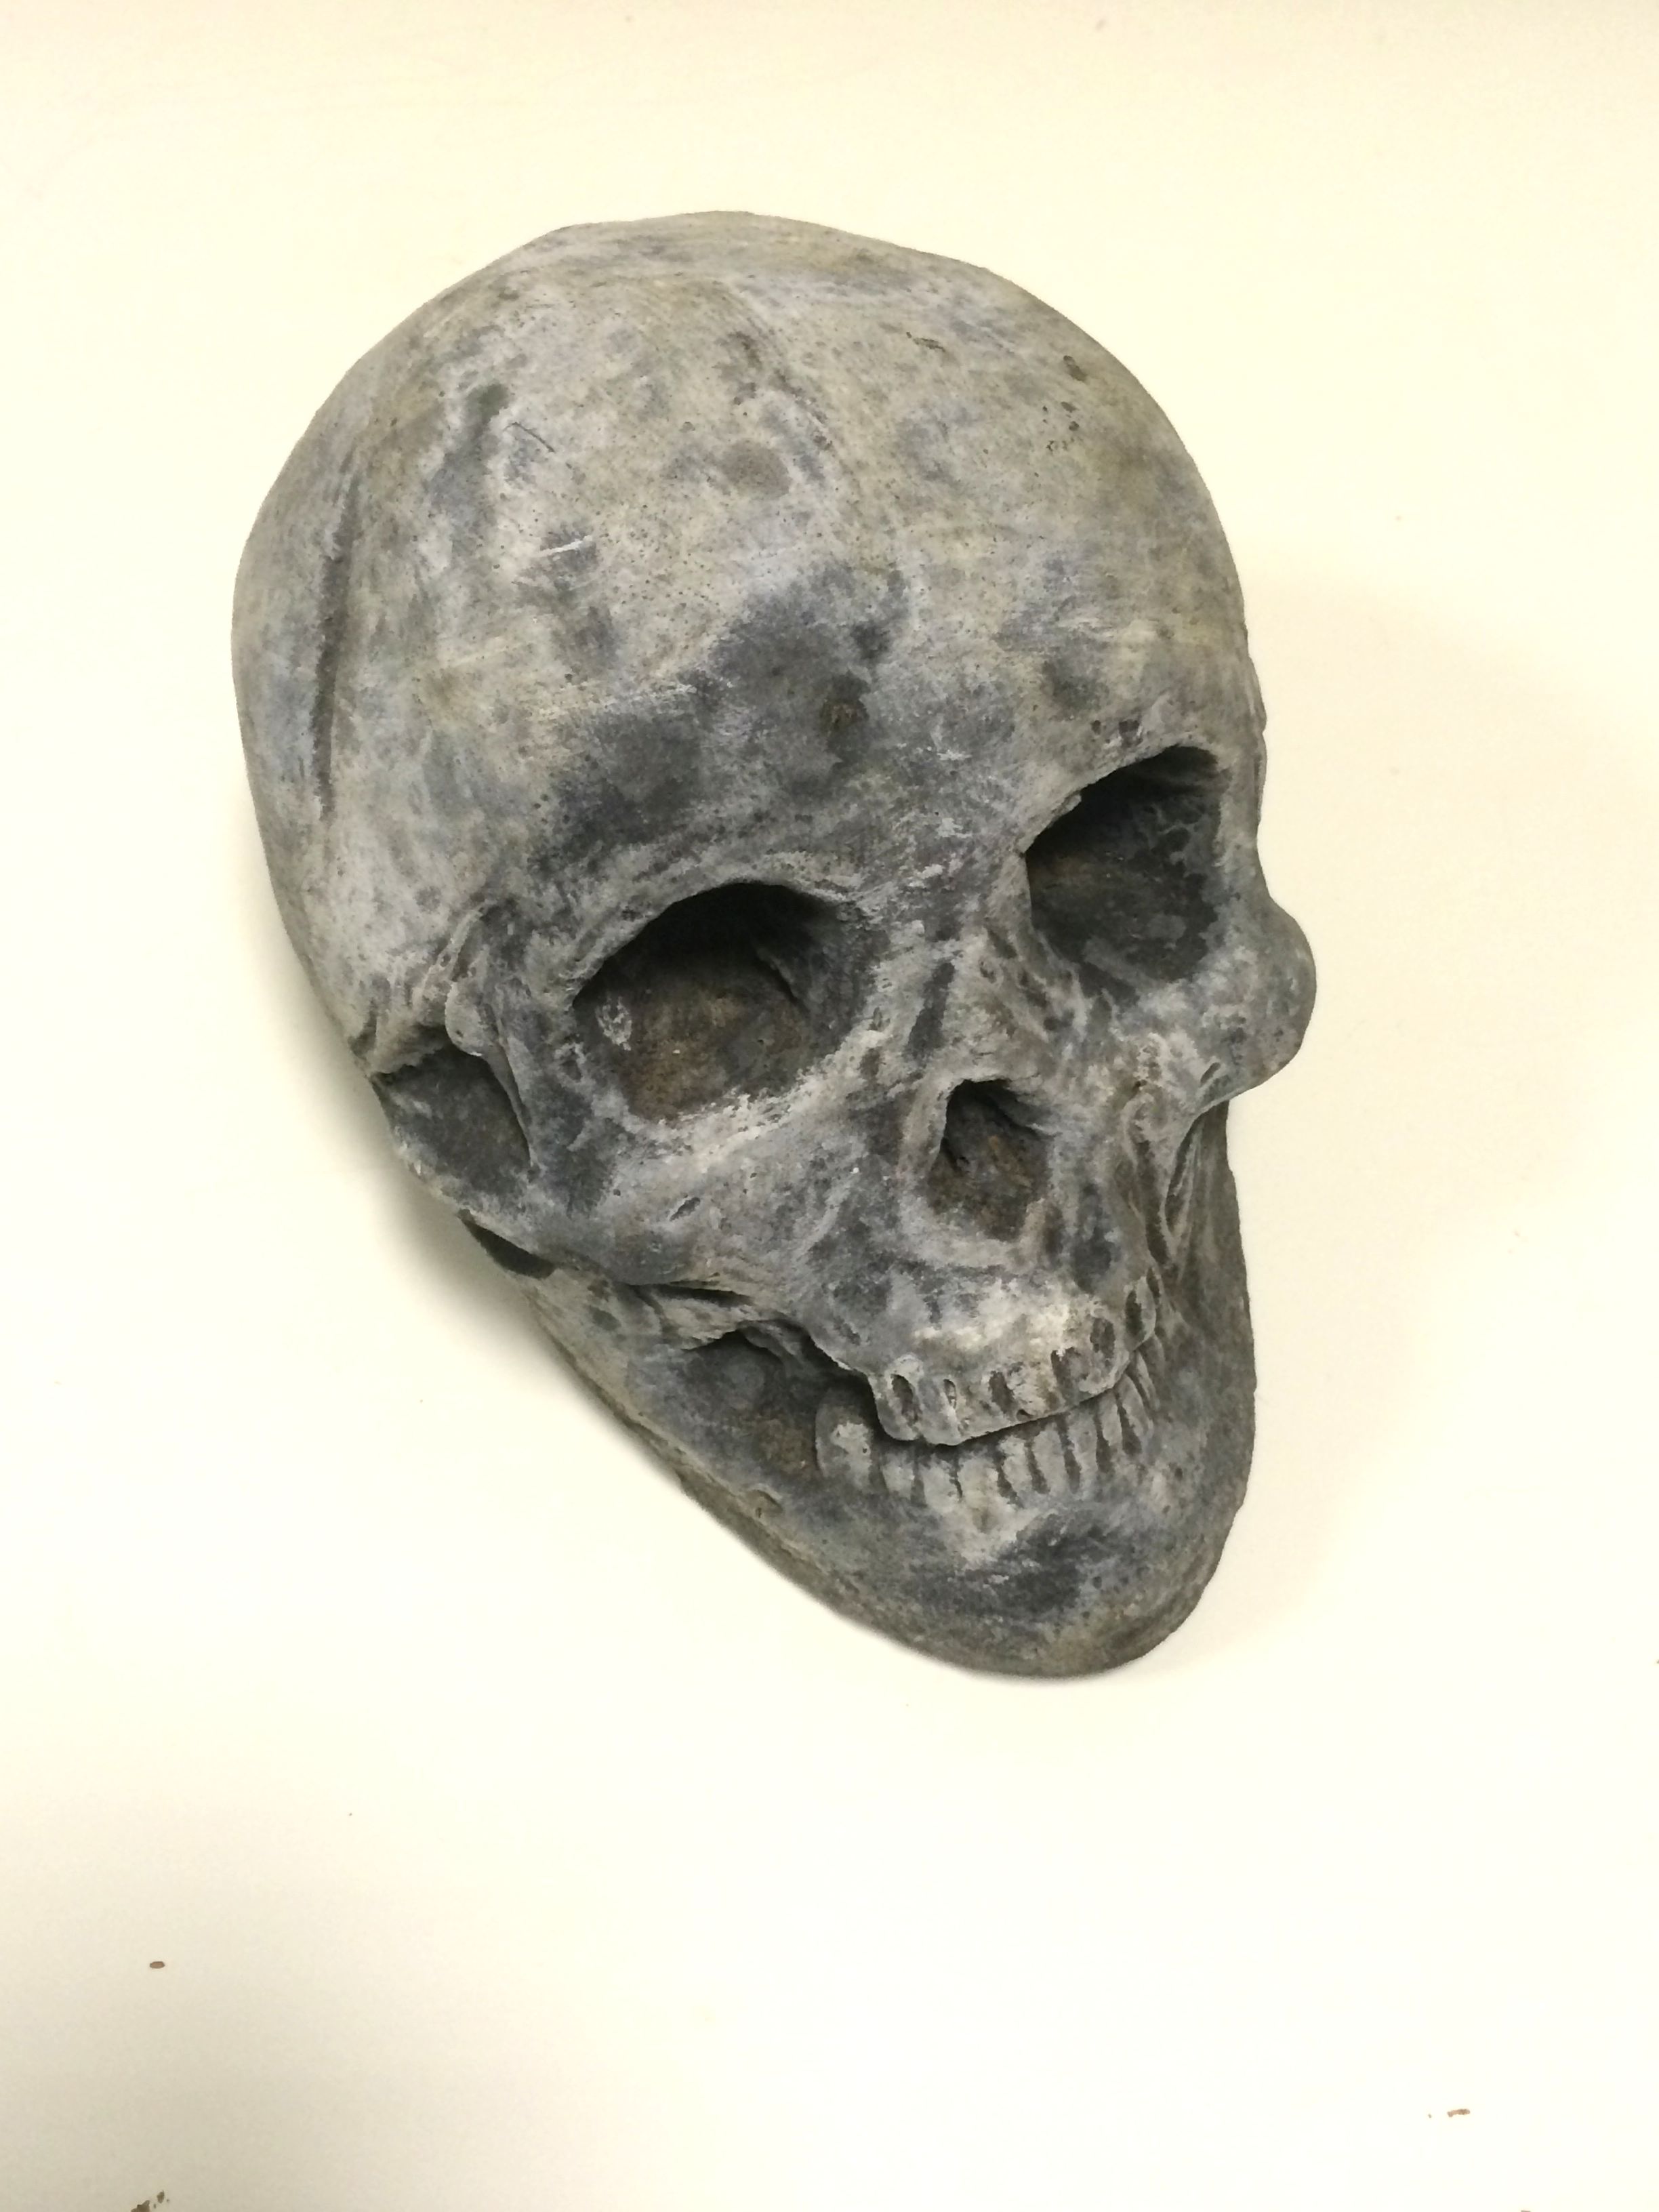 Adult size ornamental skull made with reconstituted stone.